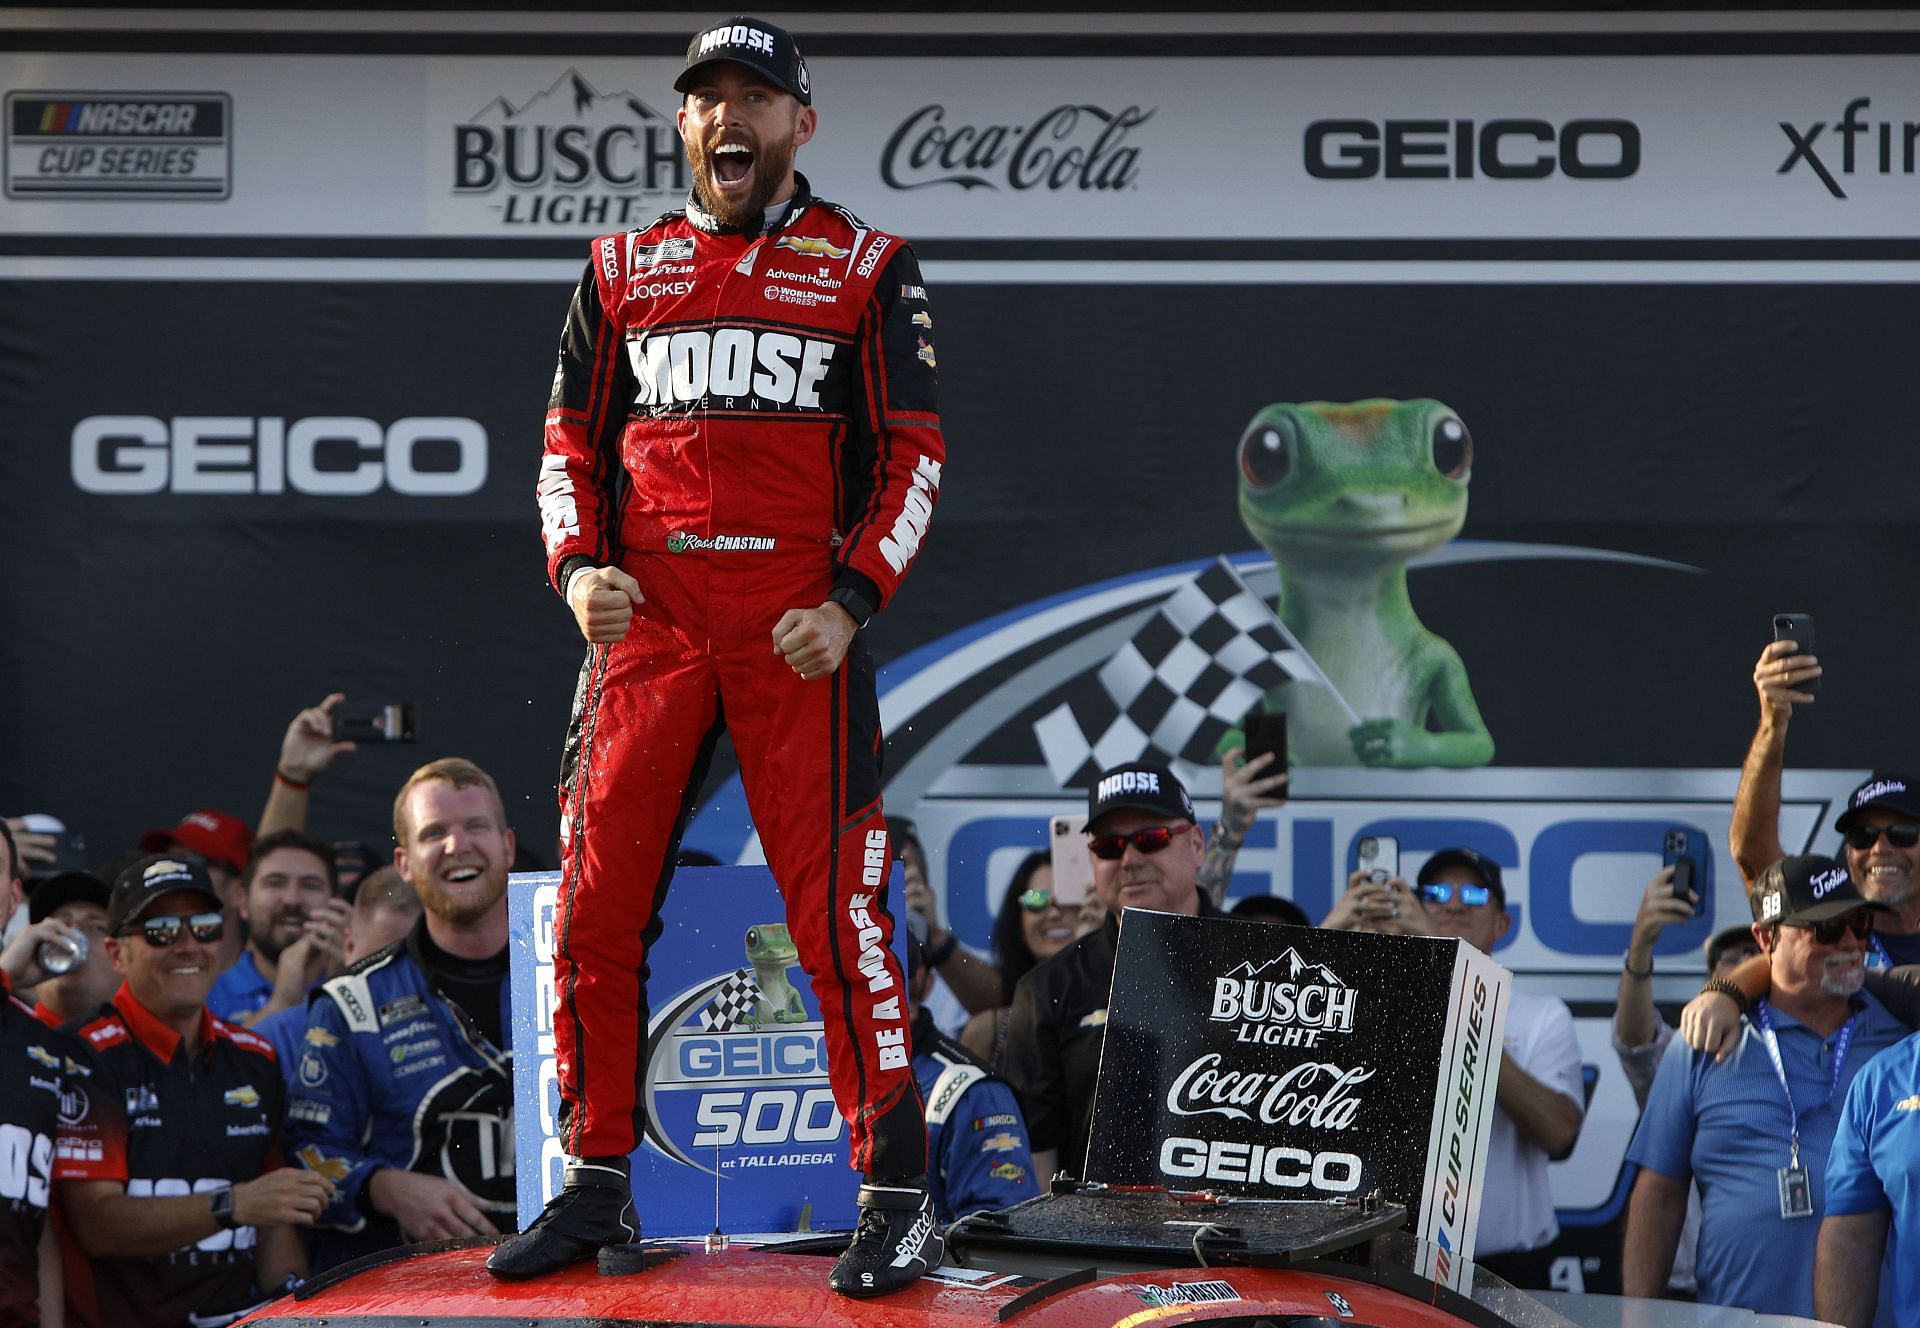 Ross Chastain celebrates in victory lane after winning the NASCAR Cup Series GEICO 500 at Talladega Superspeedway (Photo by Sean Gardner/Getty Images)